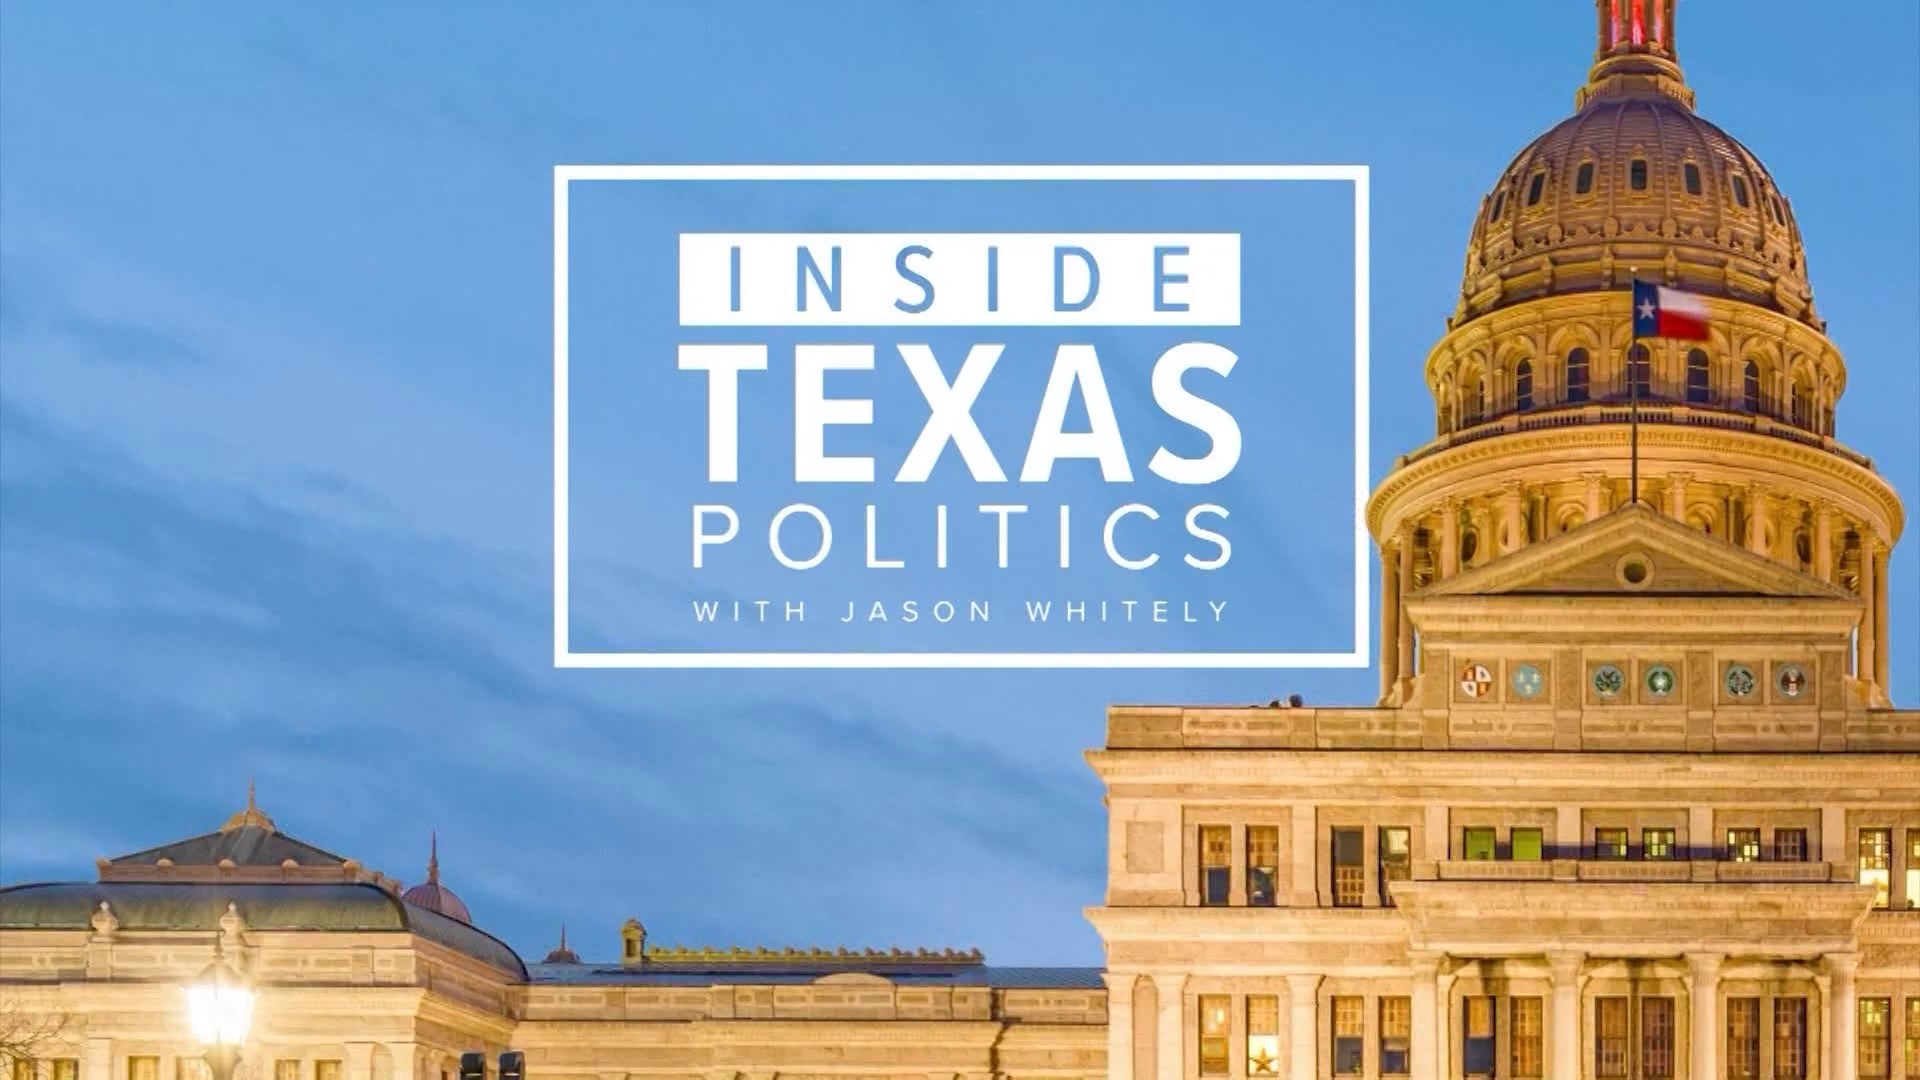 WFAA's Jason Whitely and Berna Dean Steptoe lead discussions with local lawmakers and community leaders, providing in-depth analysis of Texas politics. 